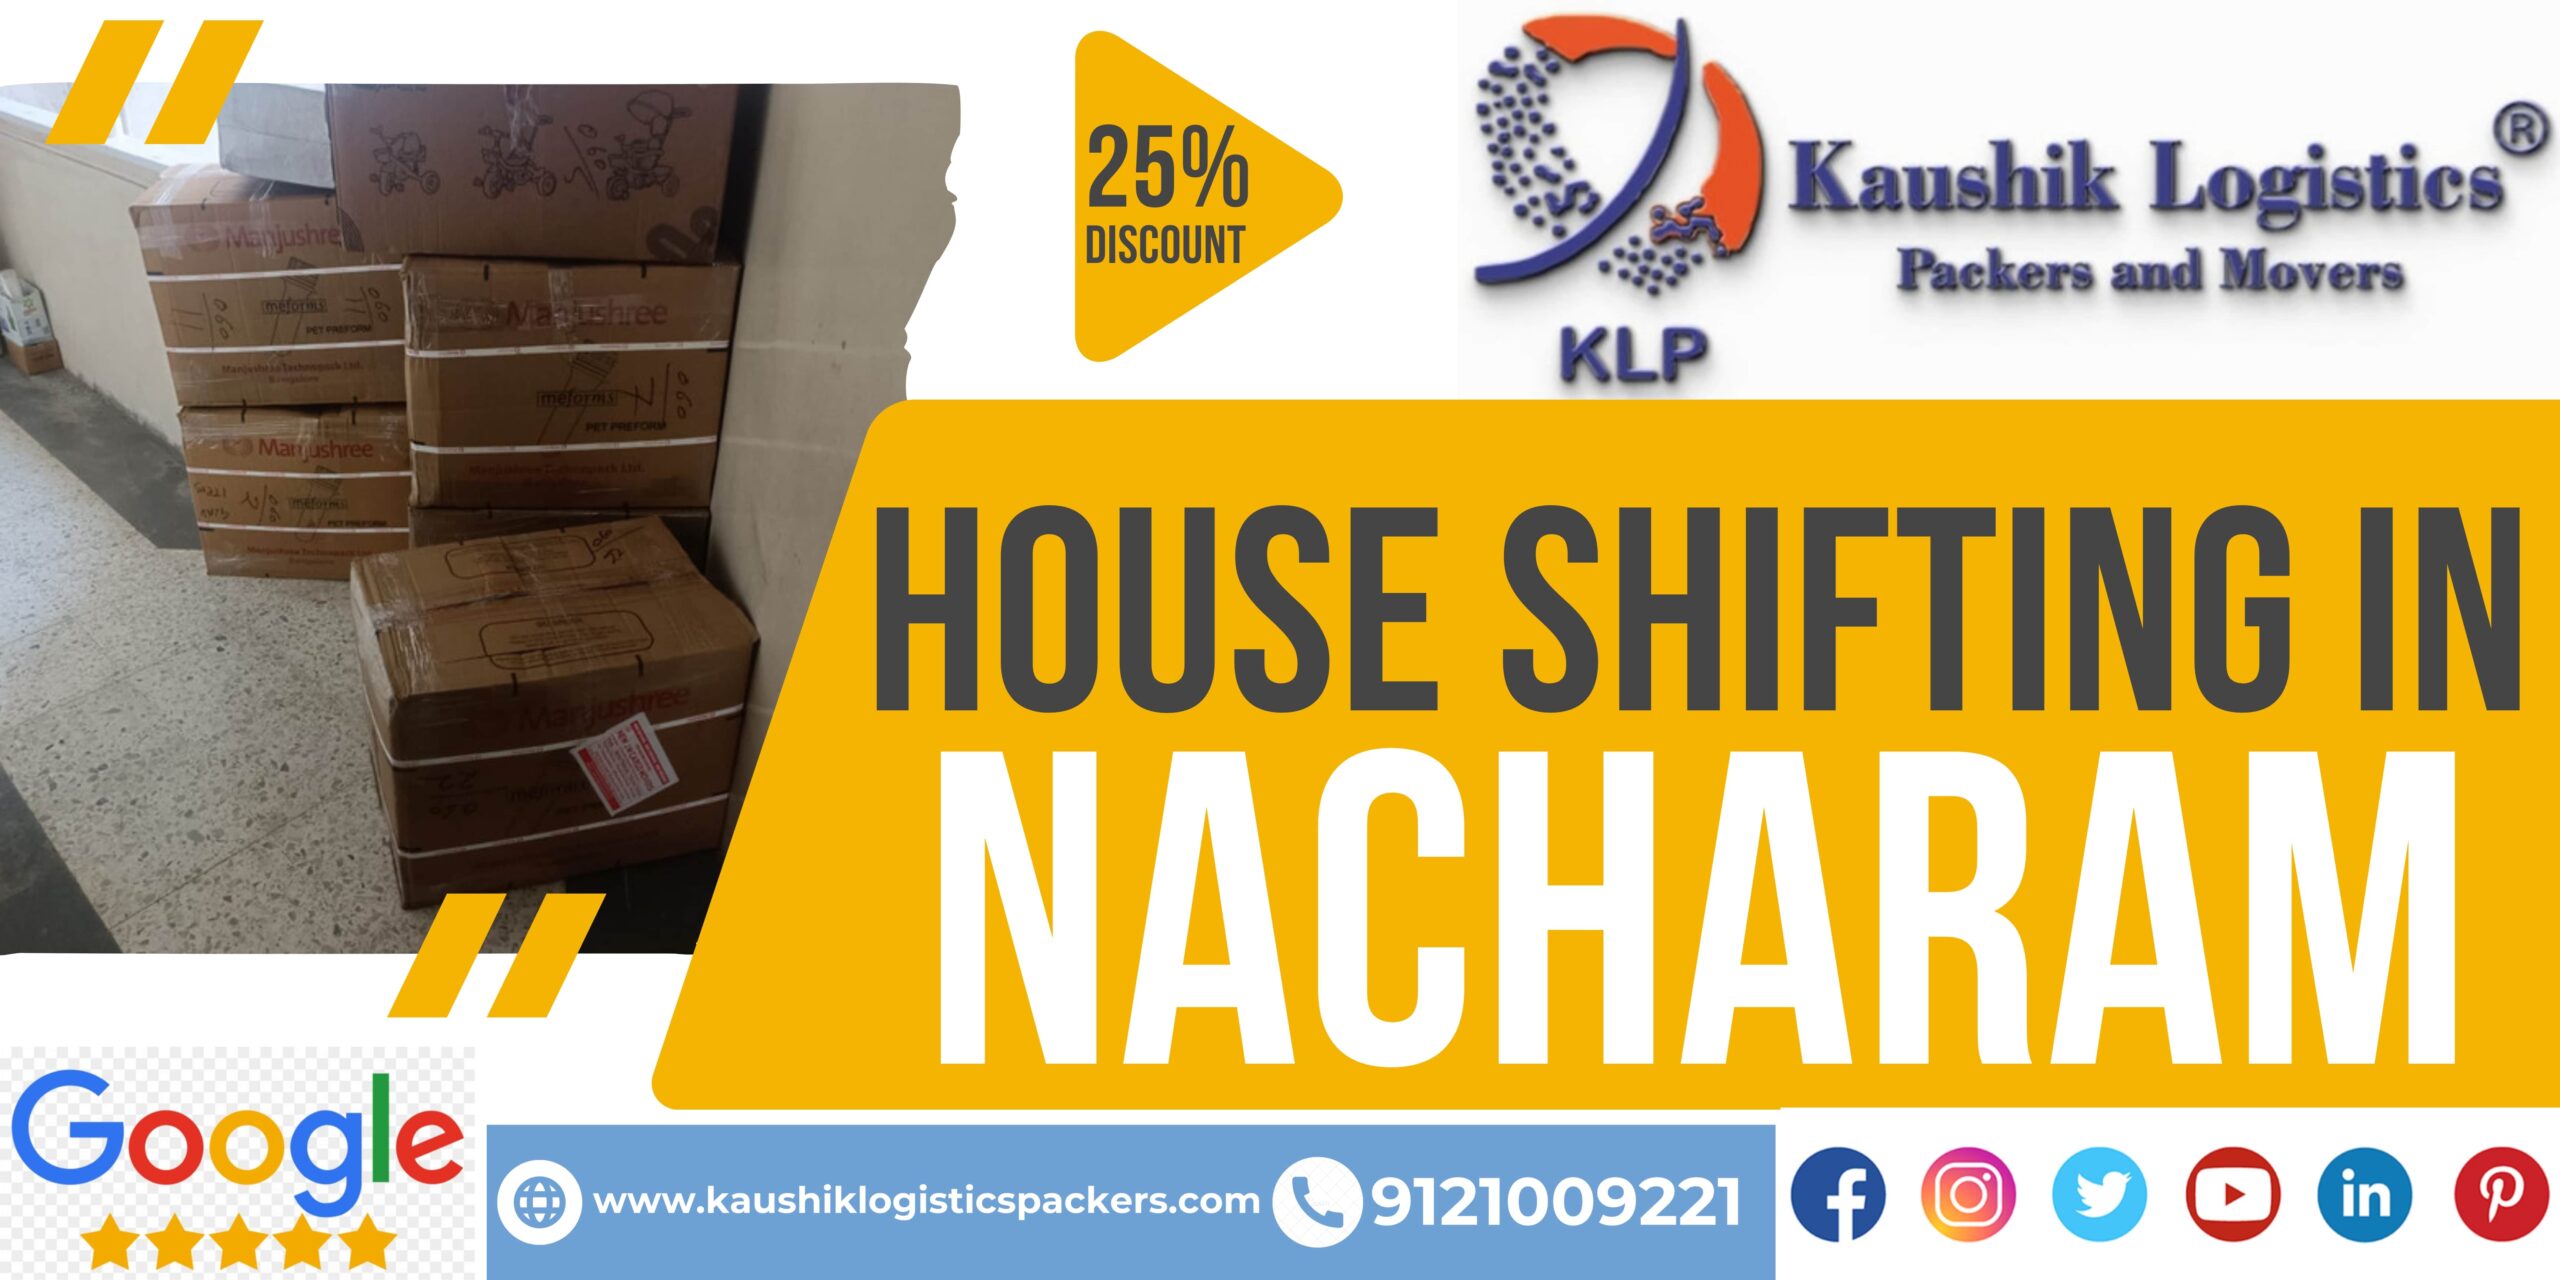 Packers and Movers In Nacharam